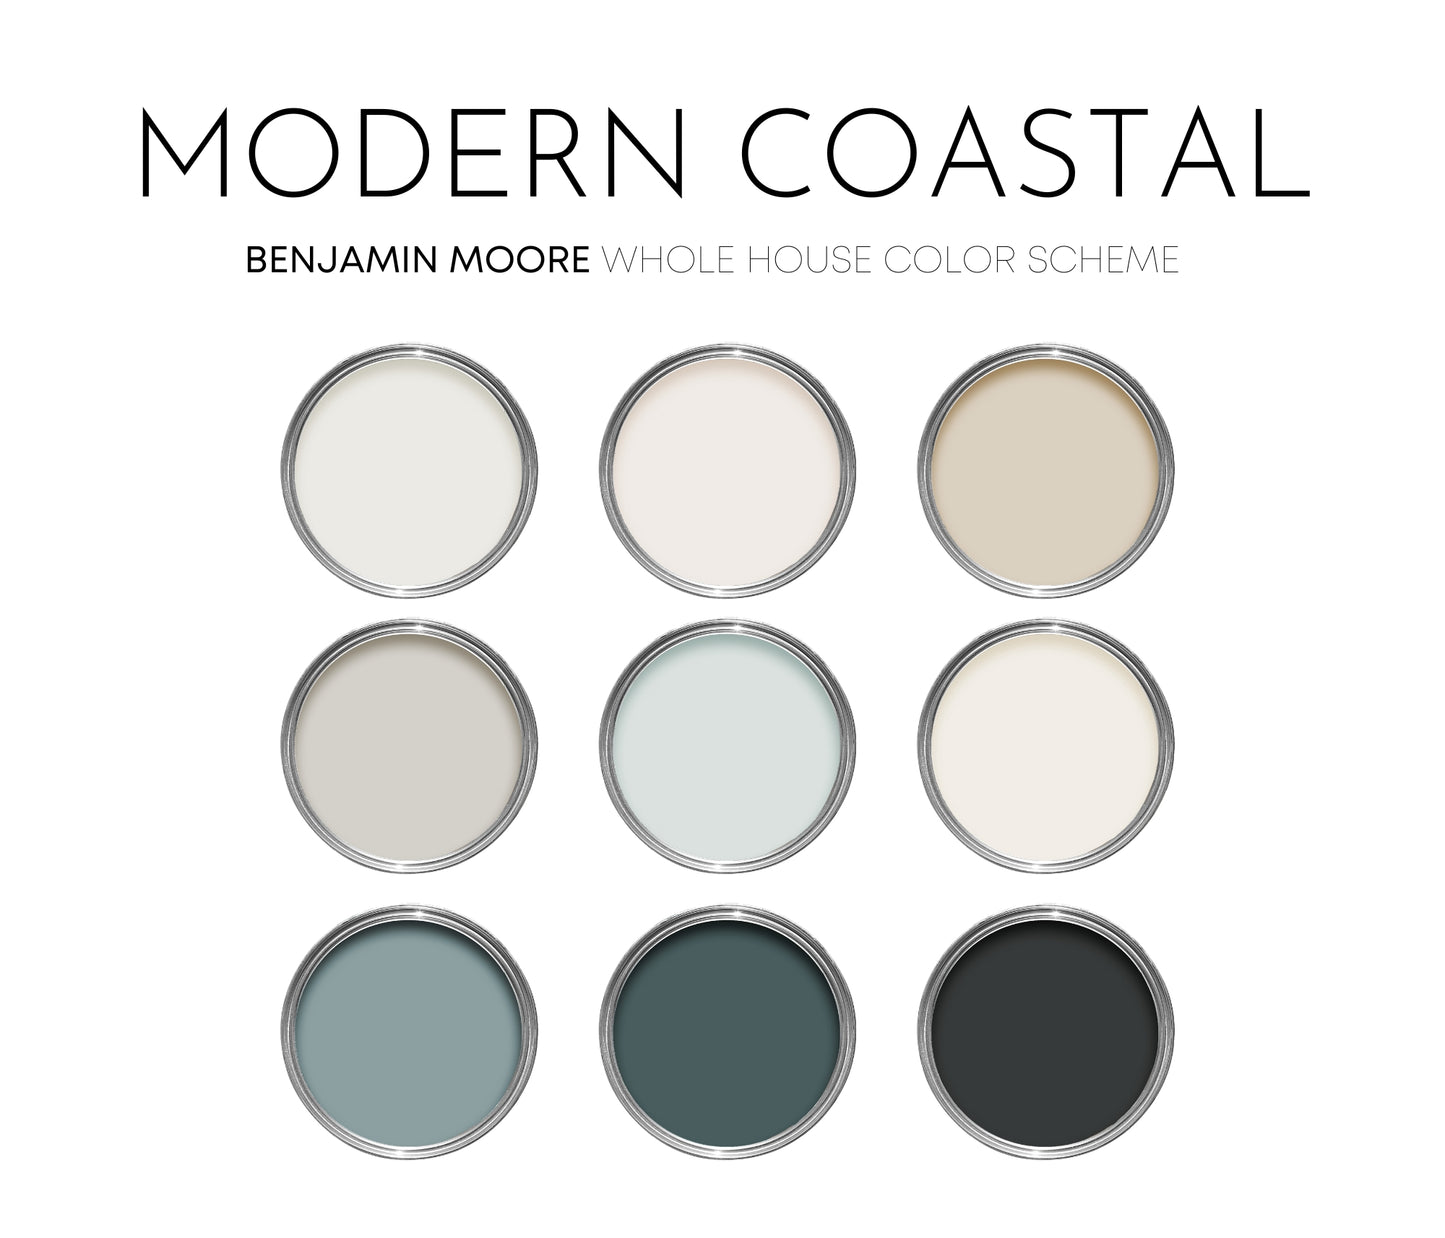 Modern Coastal Benjamin Moore Paint Palette - Modern Neutral Interior Paint Colors for Home, Coastal Interior Design Color Palette, Swiss Coffee